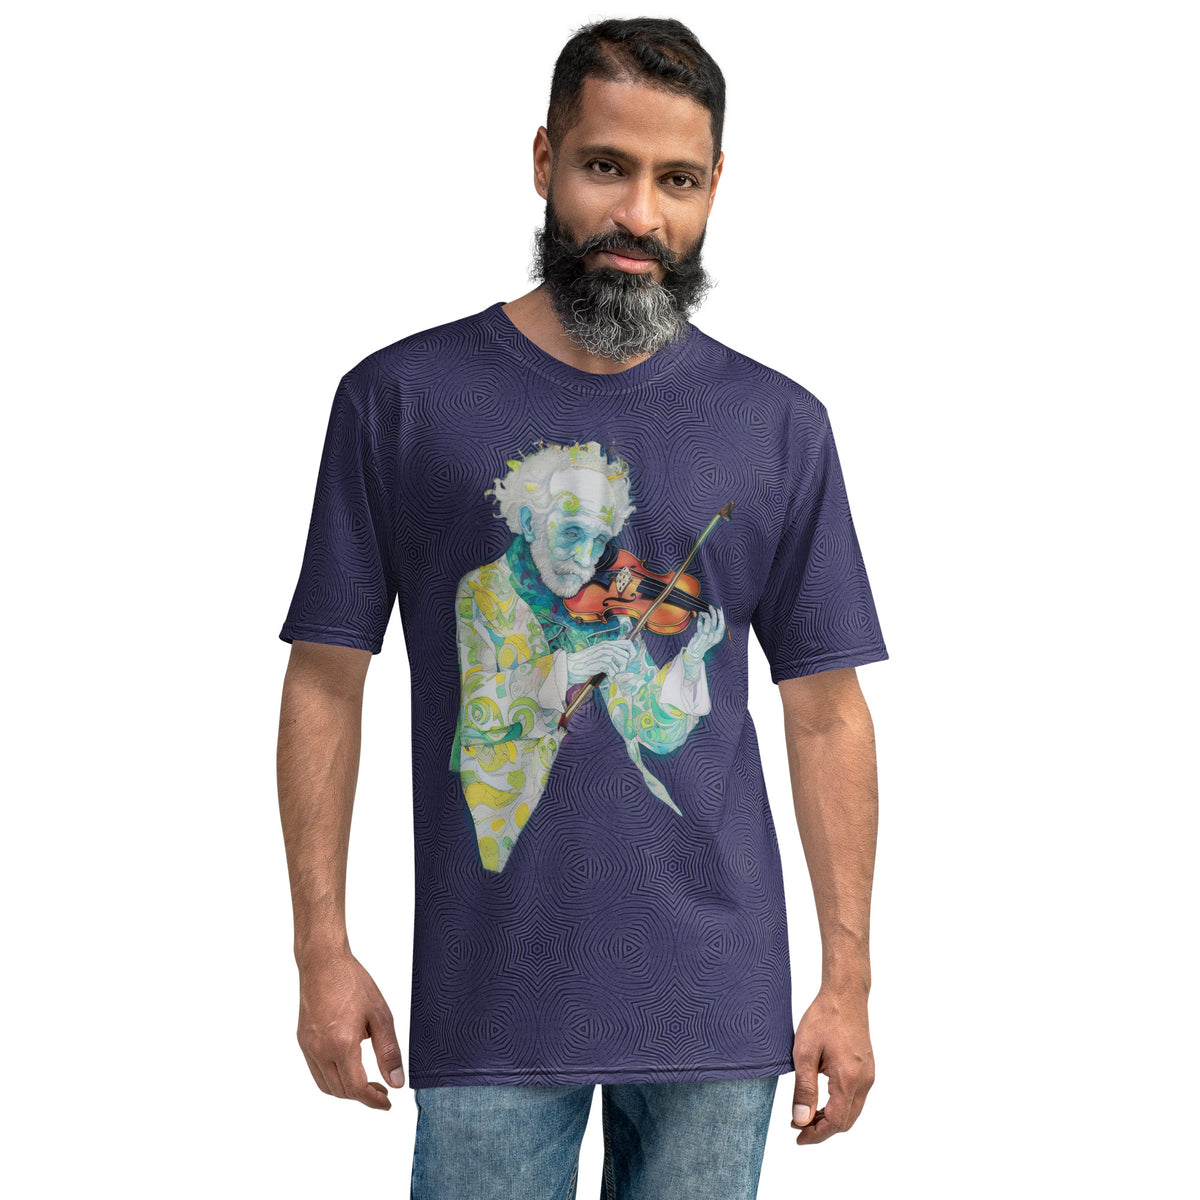 Front view of Radiant Bloom Men's Crewneck Tee with floral design